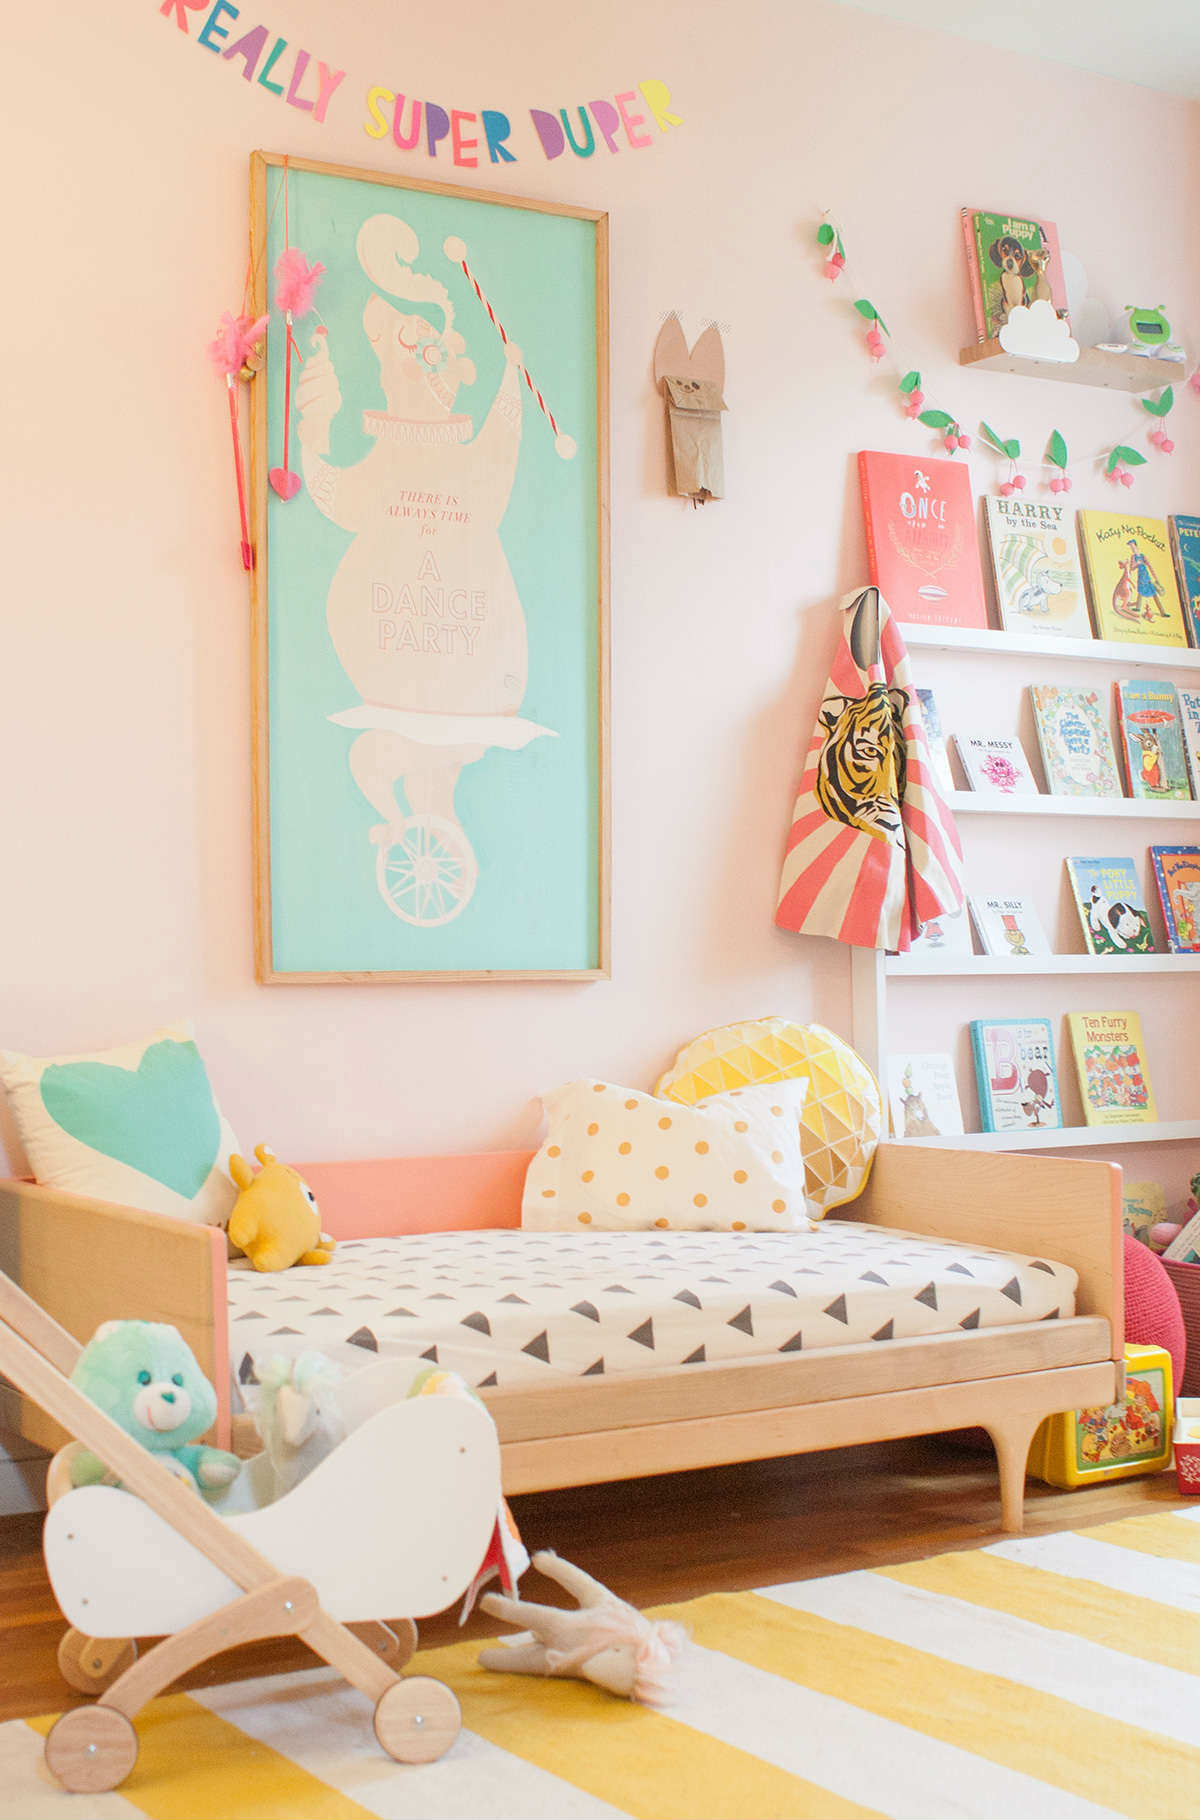 10 Gorgeous Girls Rooms Part 5 - Tinyme Blog